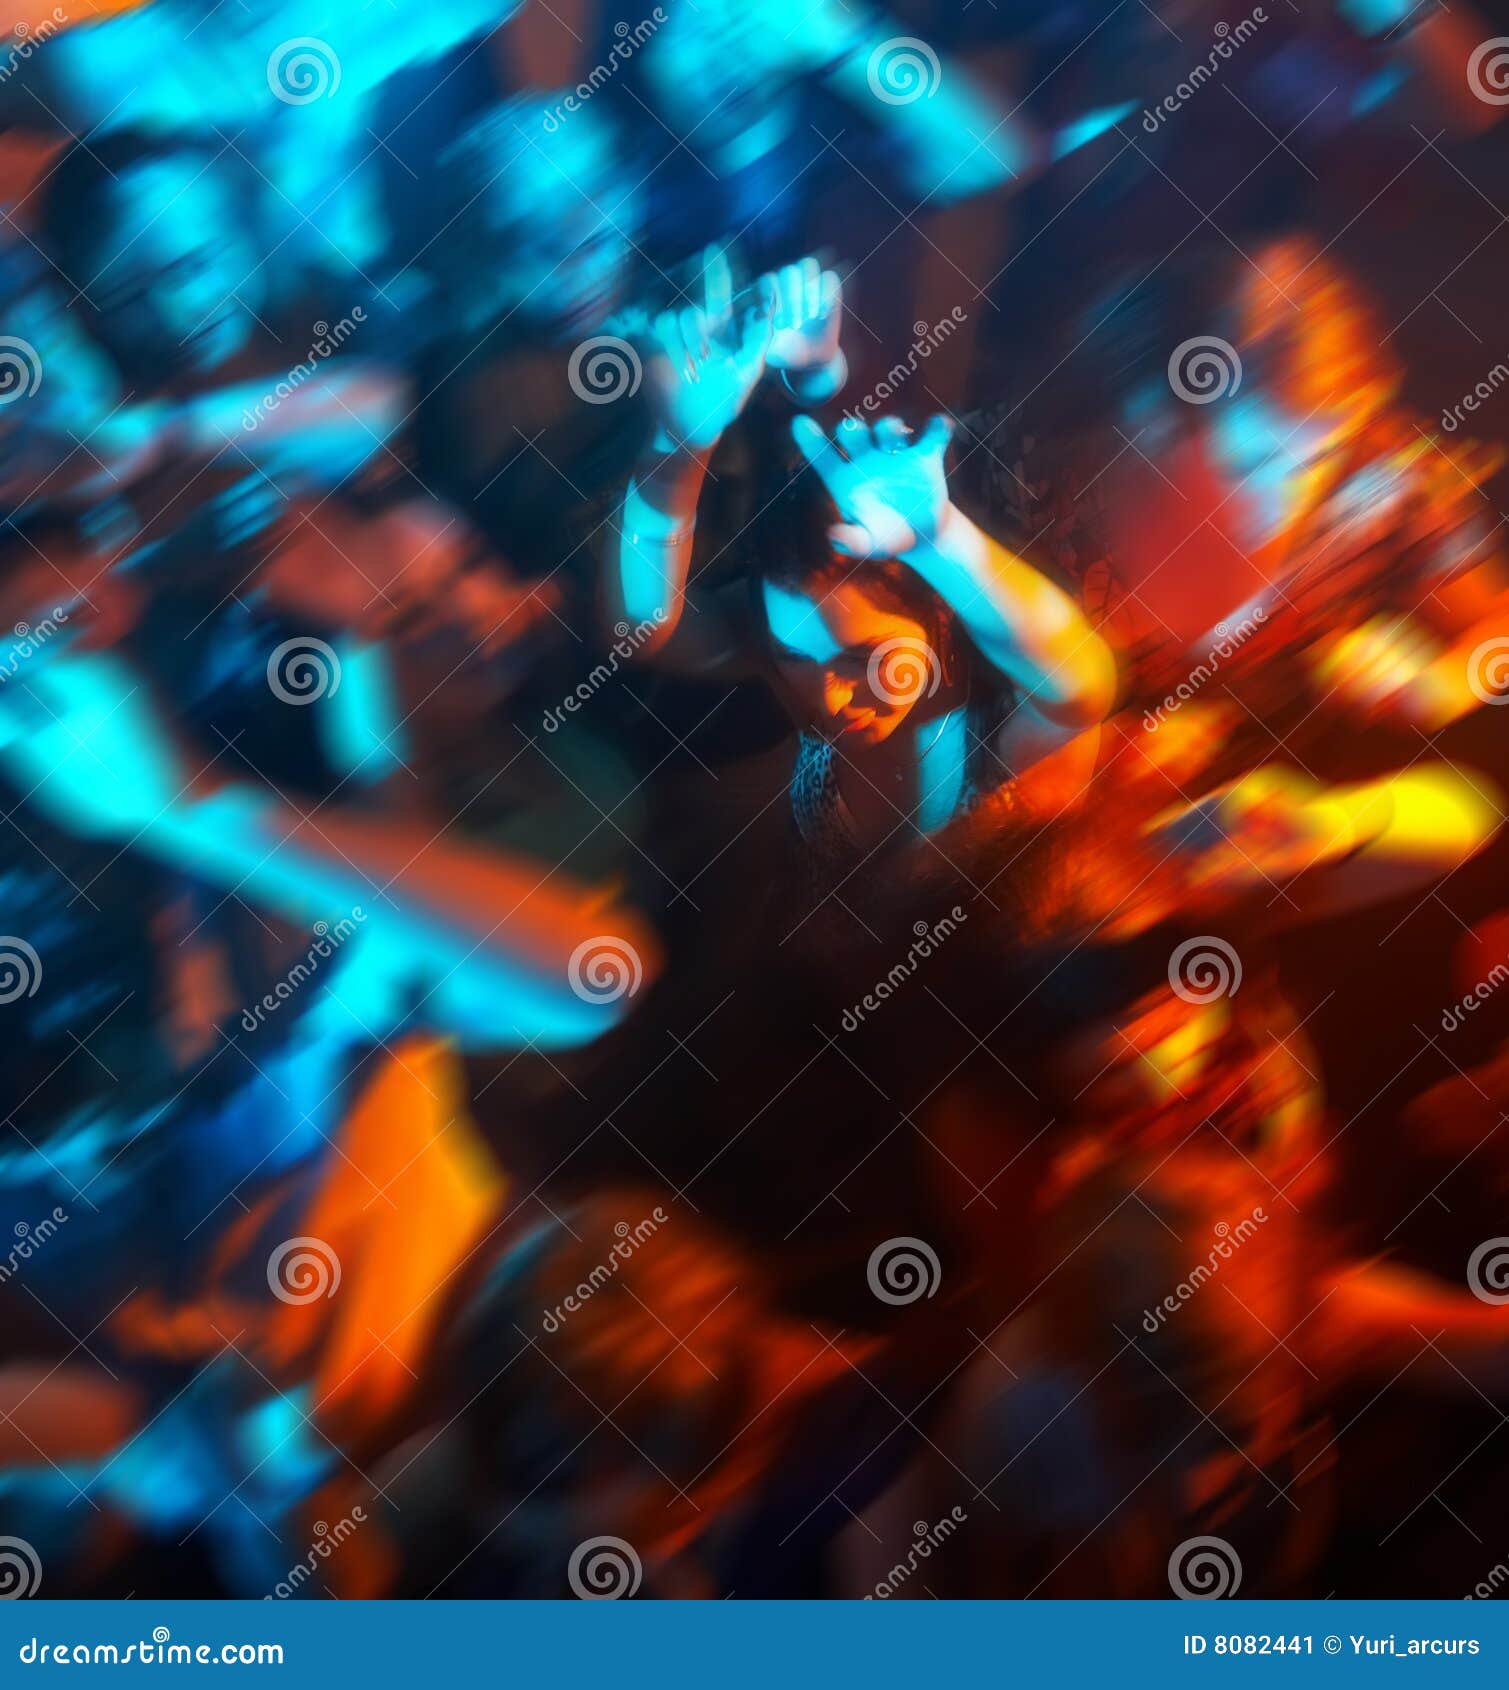 people dancing in a bar or nightclub at a party